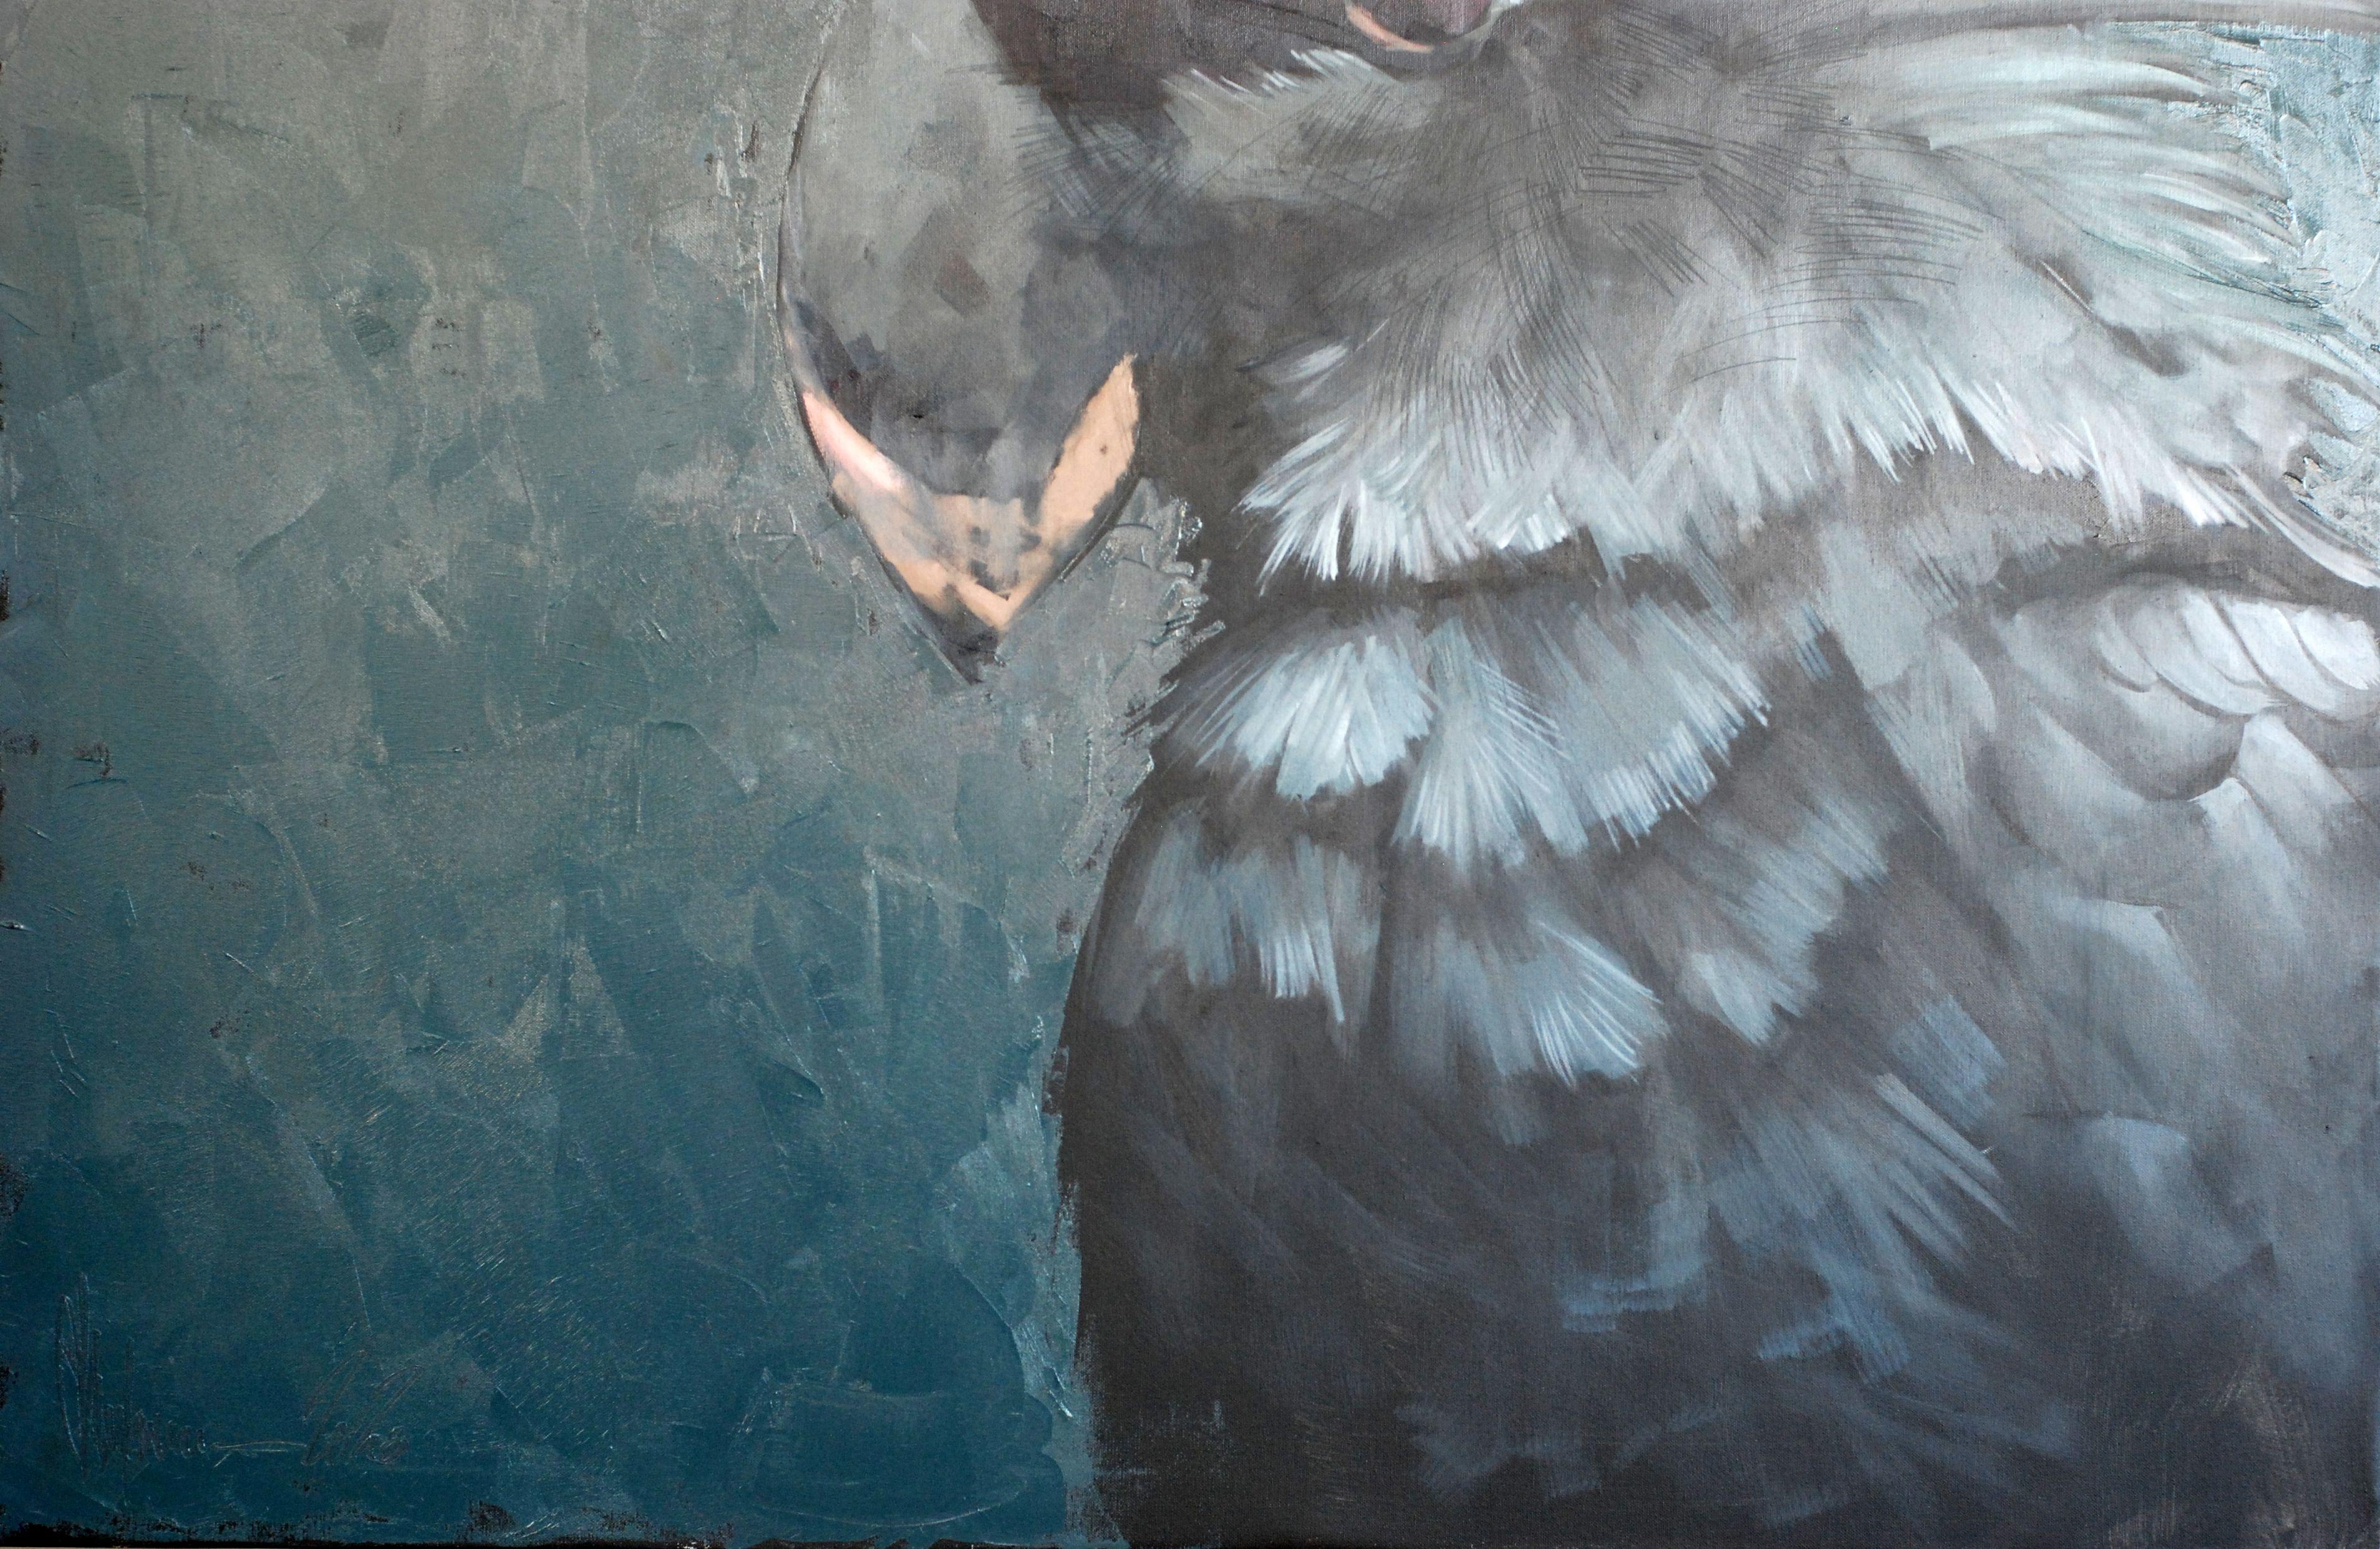 Reqiem., Painting, Oil on Canvas 3